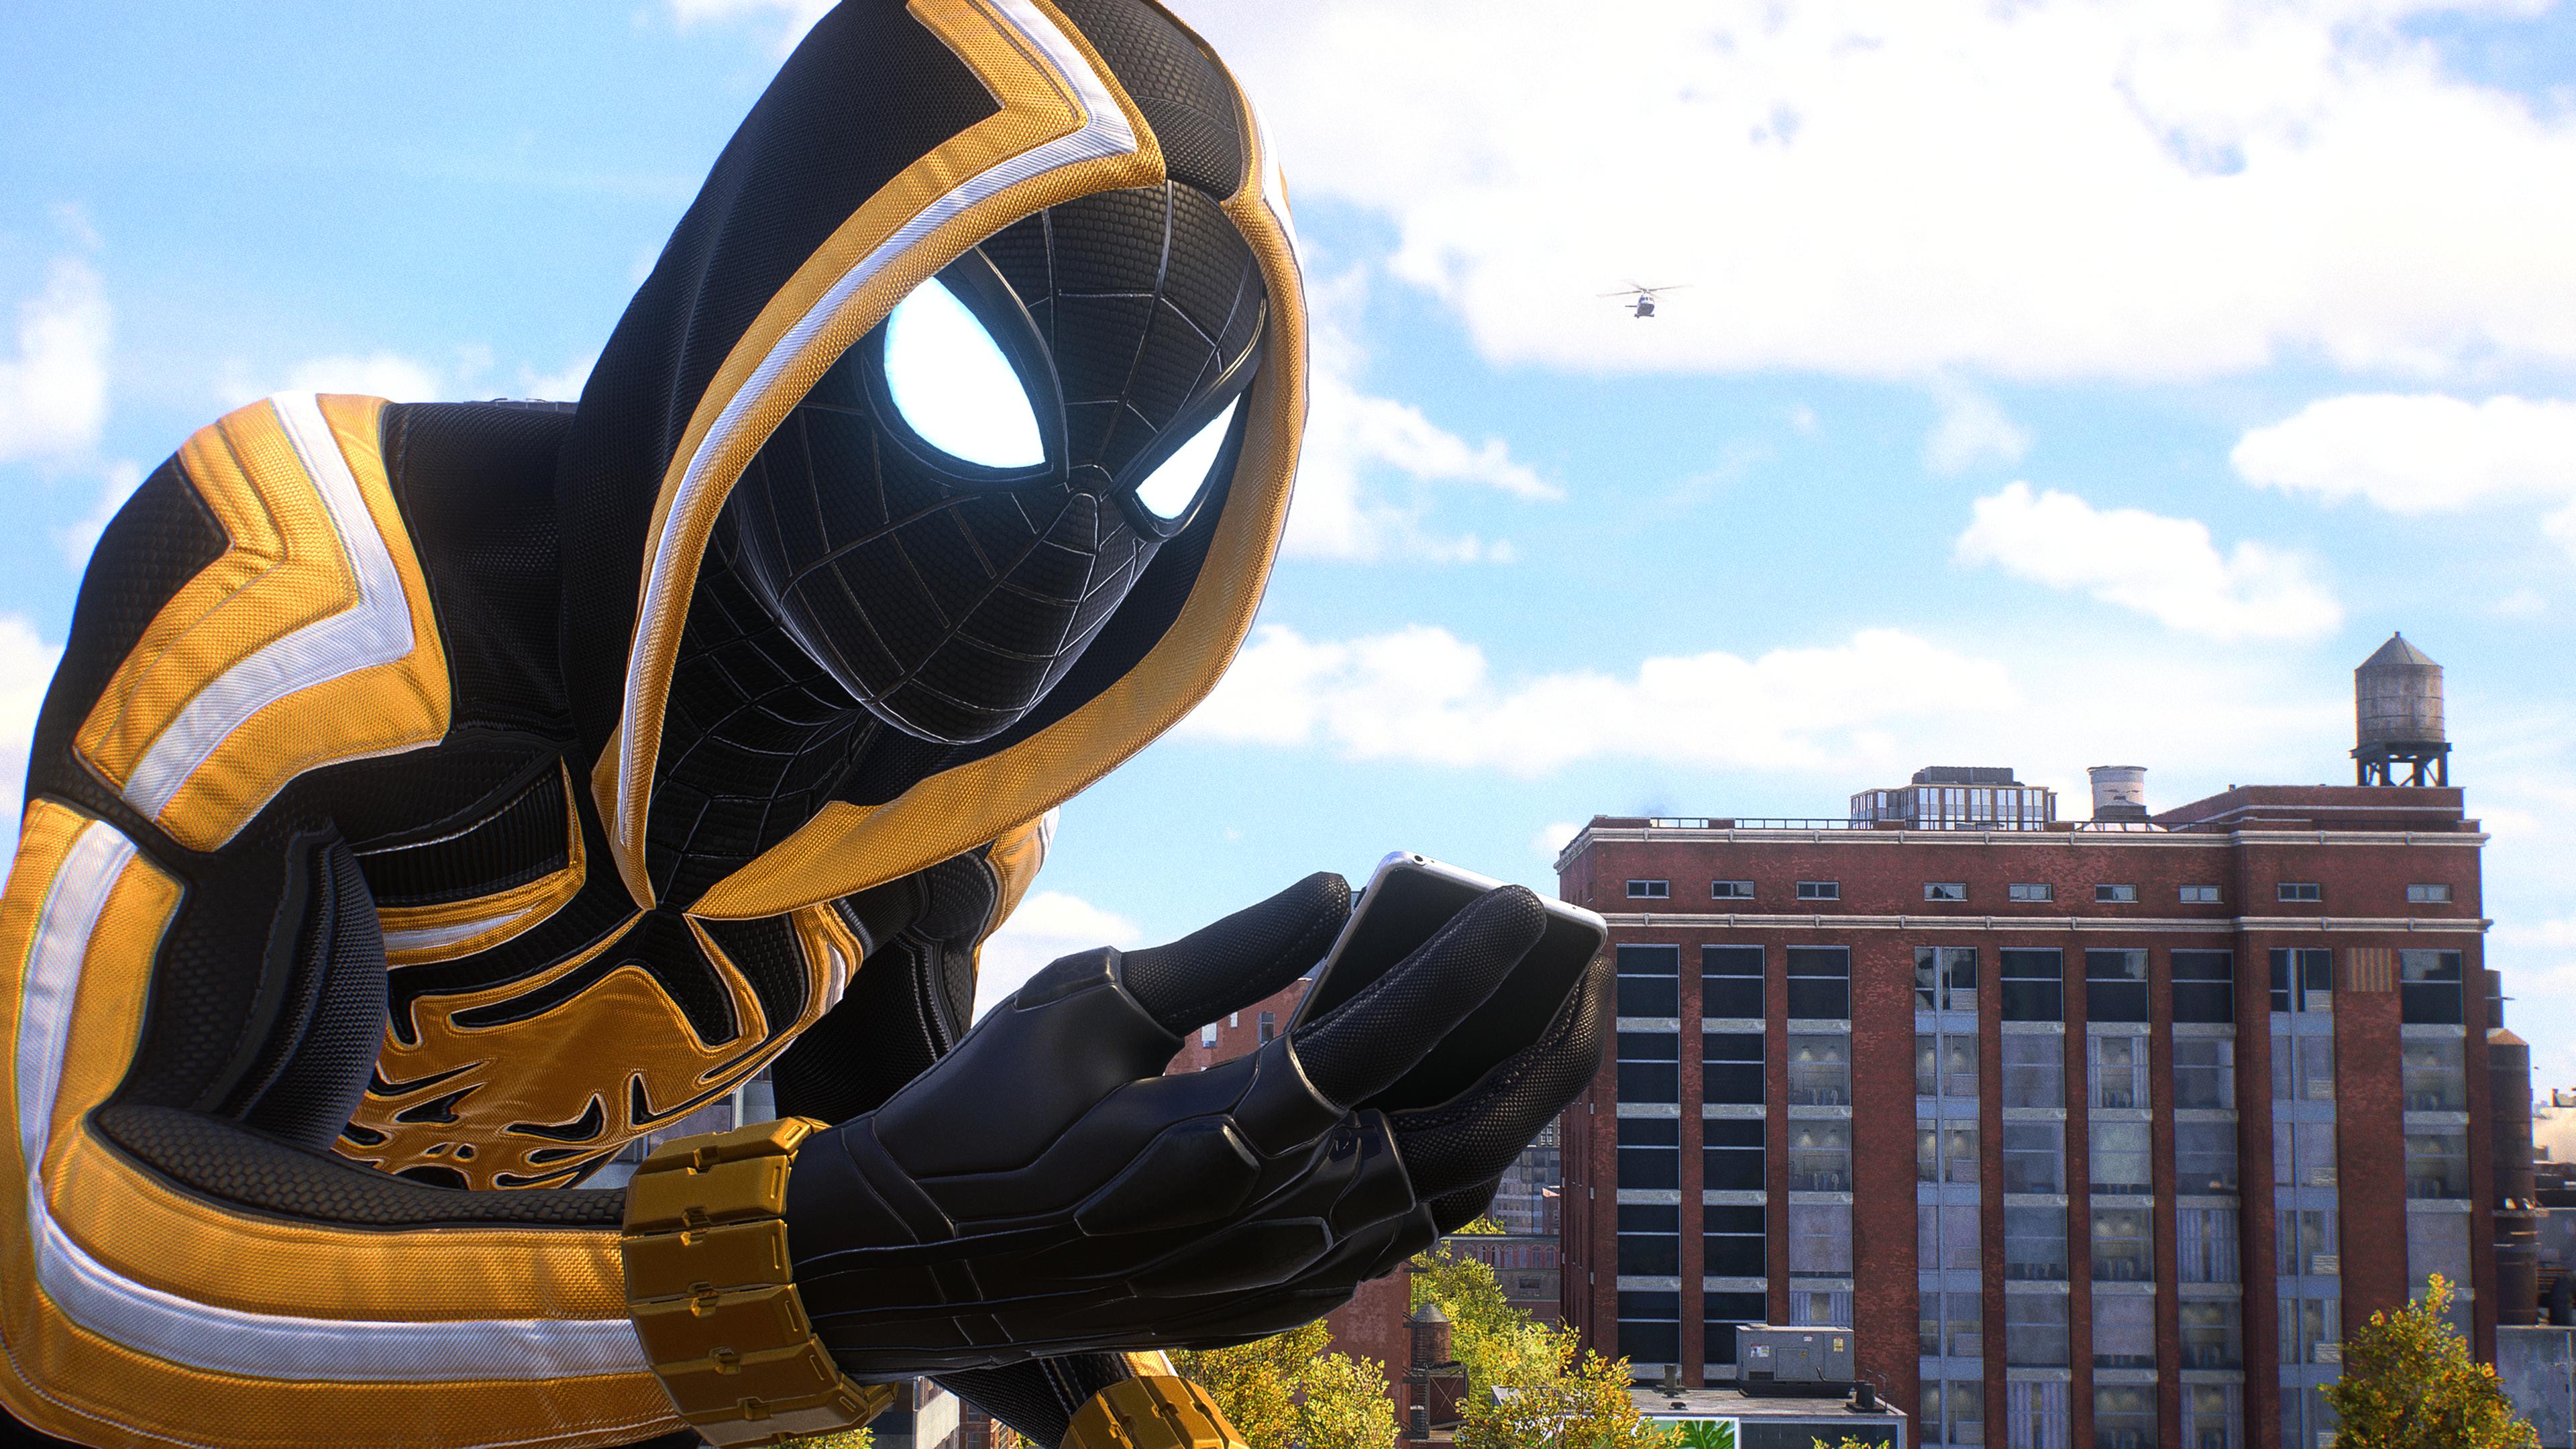 Marvel's Spider-Man 2 preview: hands-on with the web-slinging duo, Games